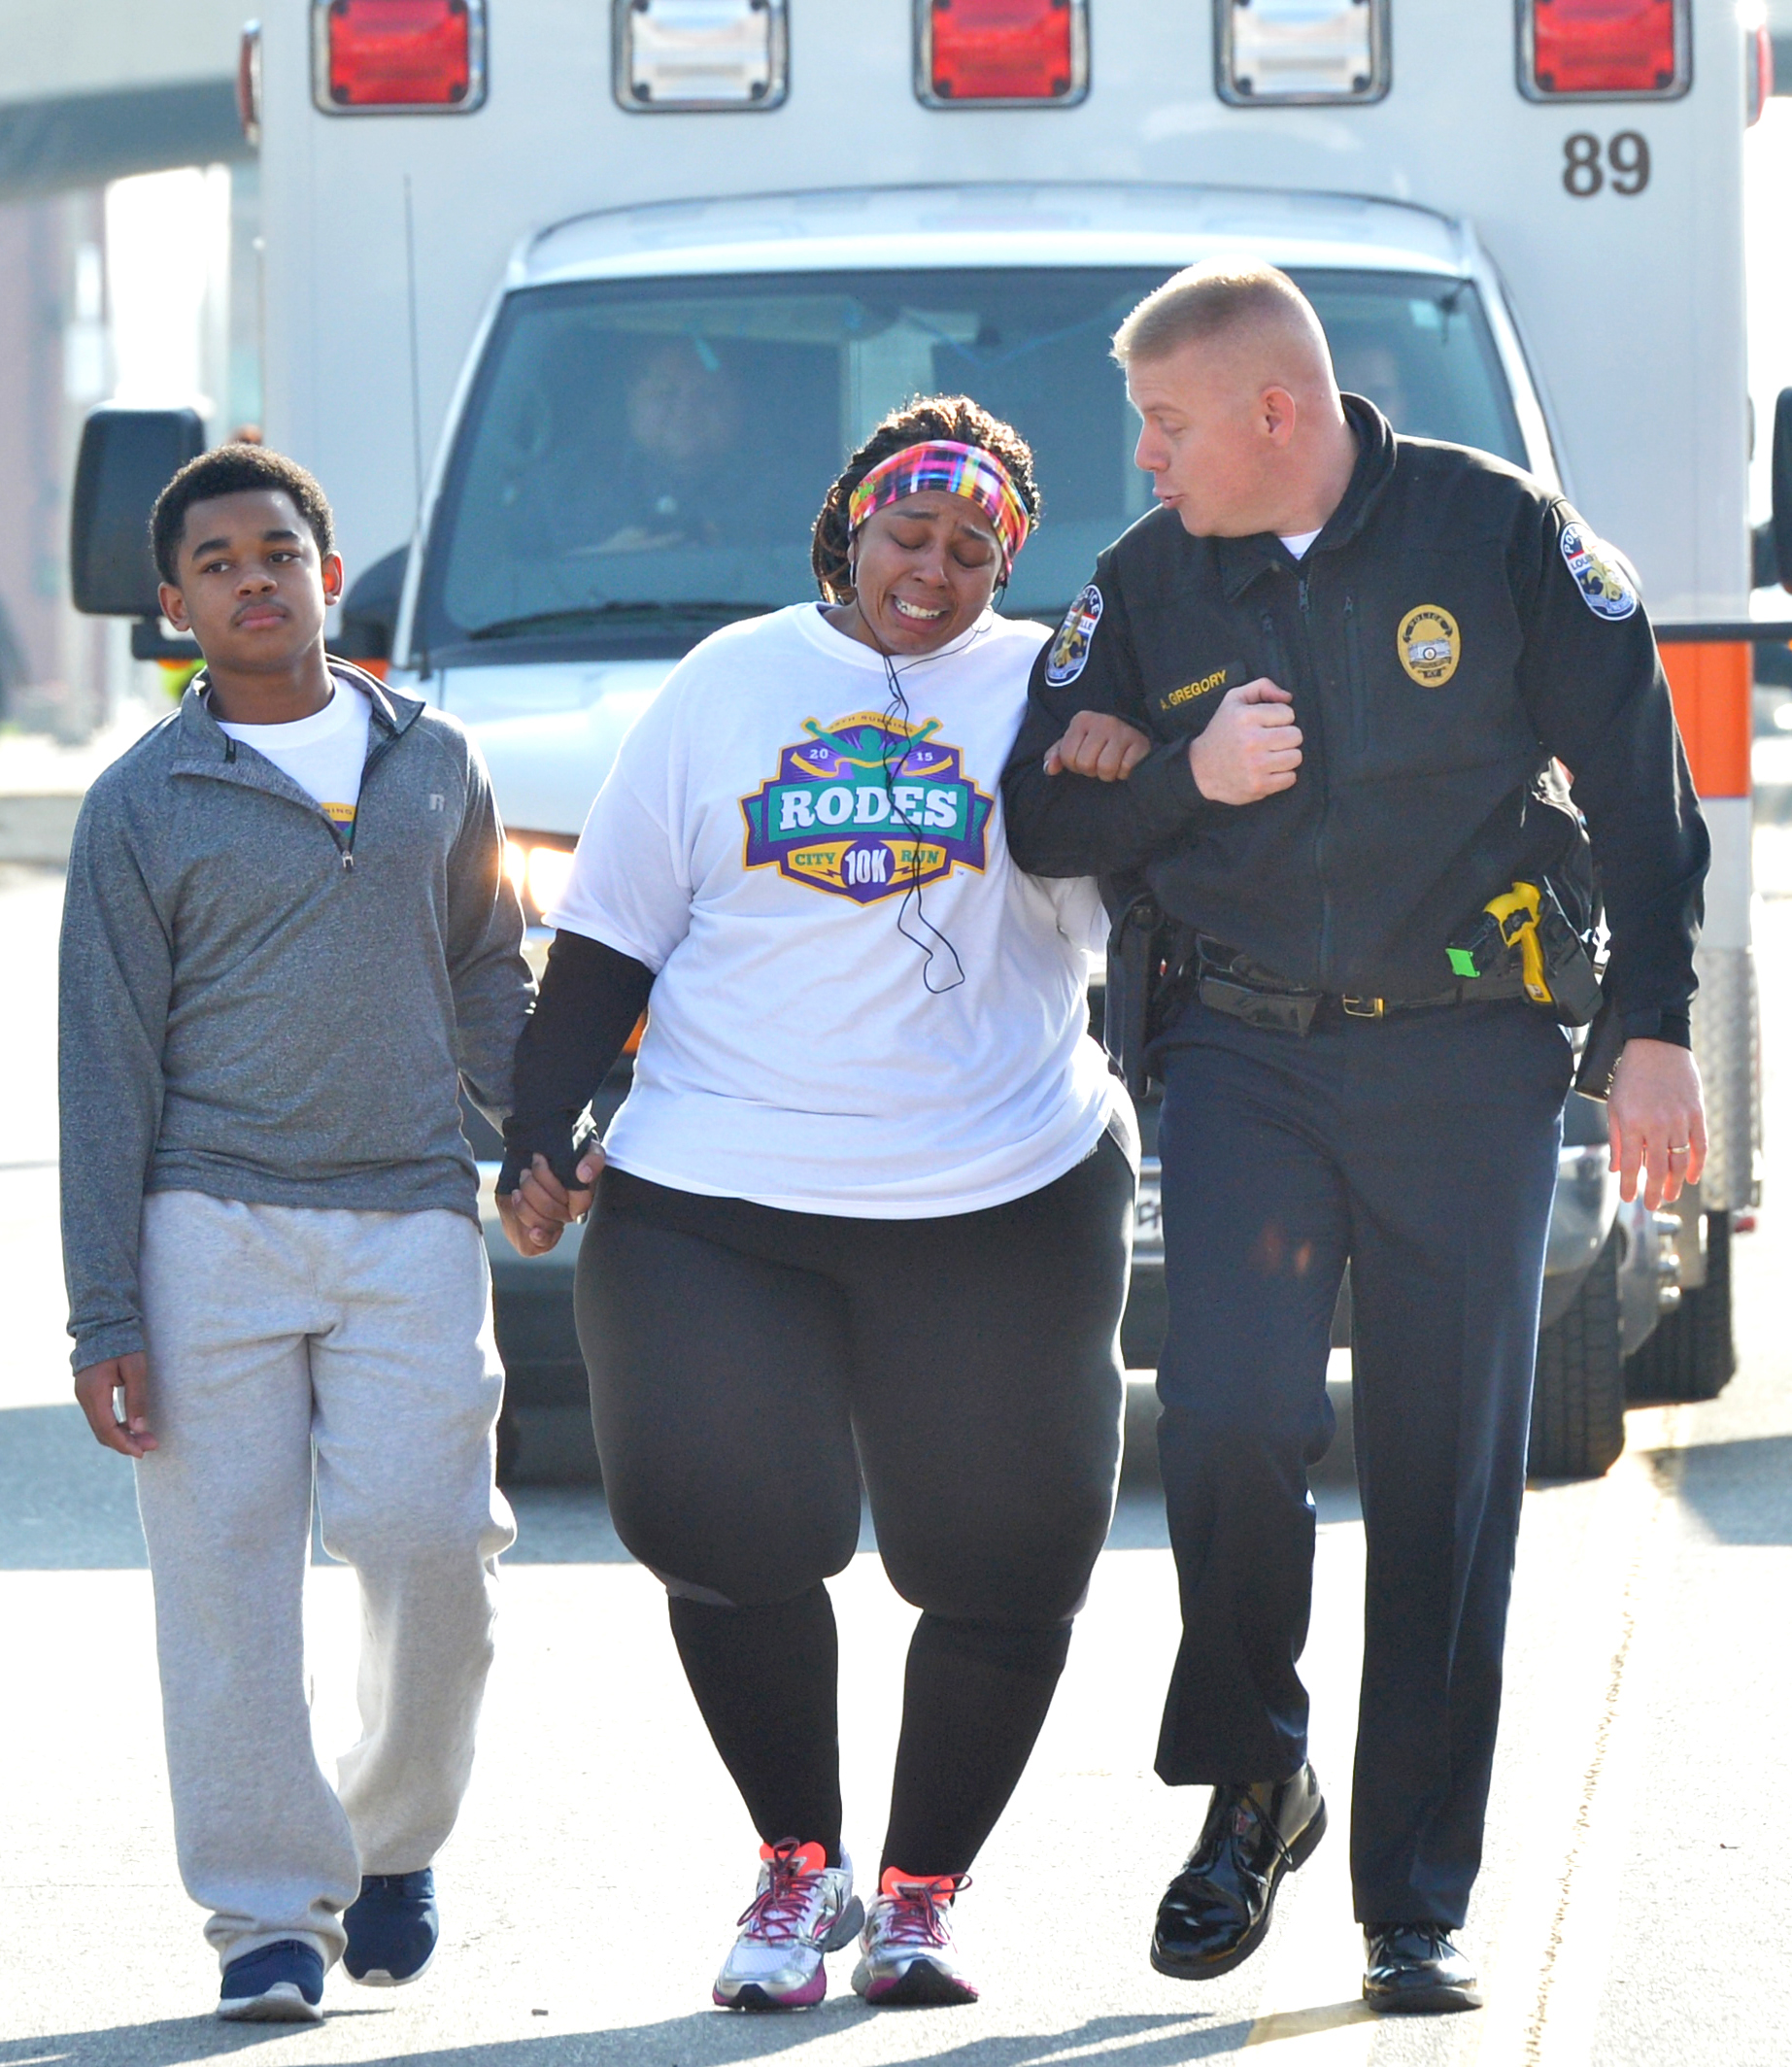 PHOTO: Police Officer Aubrey Gregory walks with Asia Ford as she participates in the Rodes City Run 10K in Louisville, Ky. on March 21, 2015.